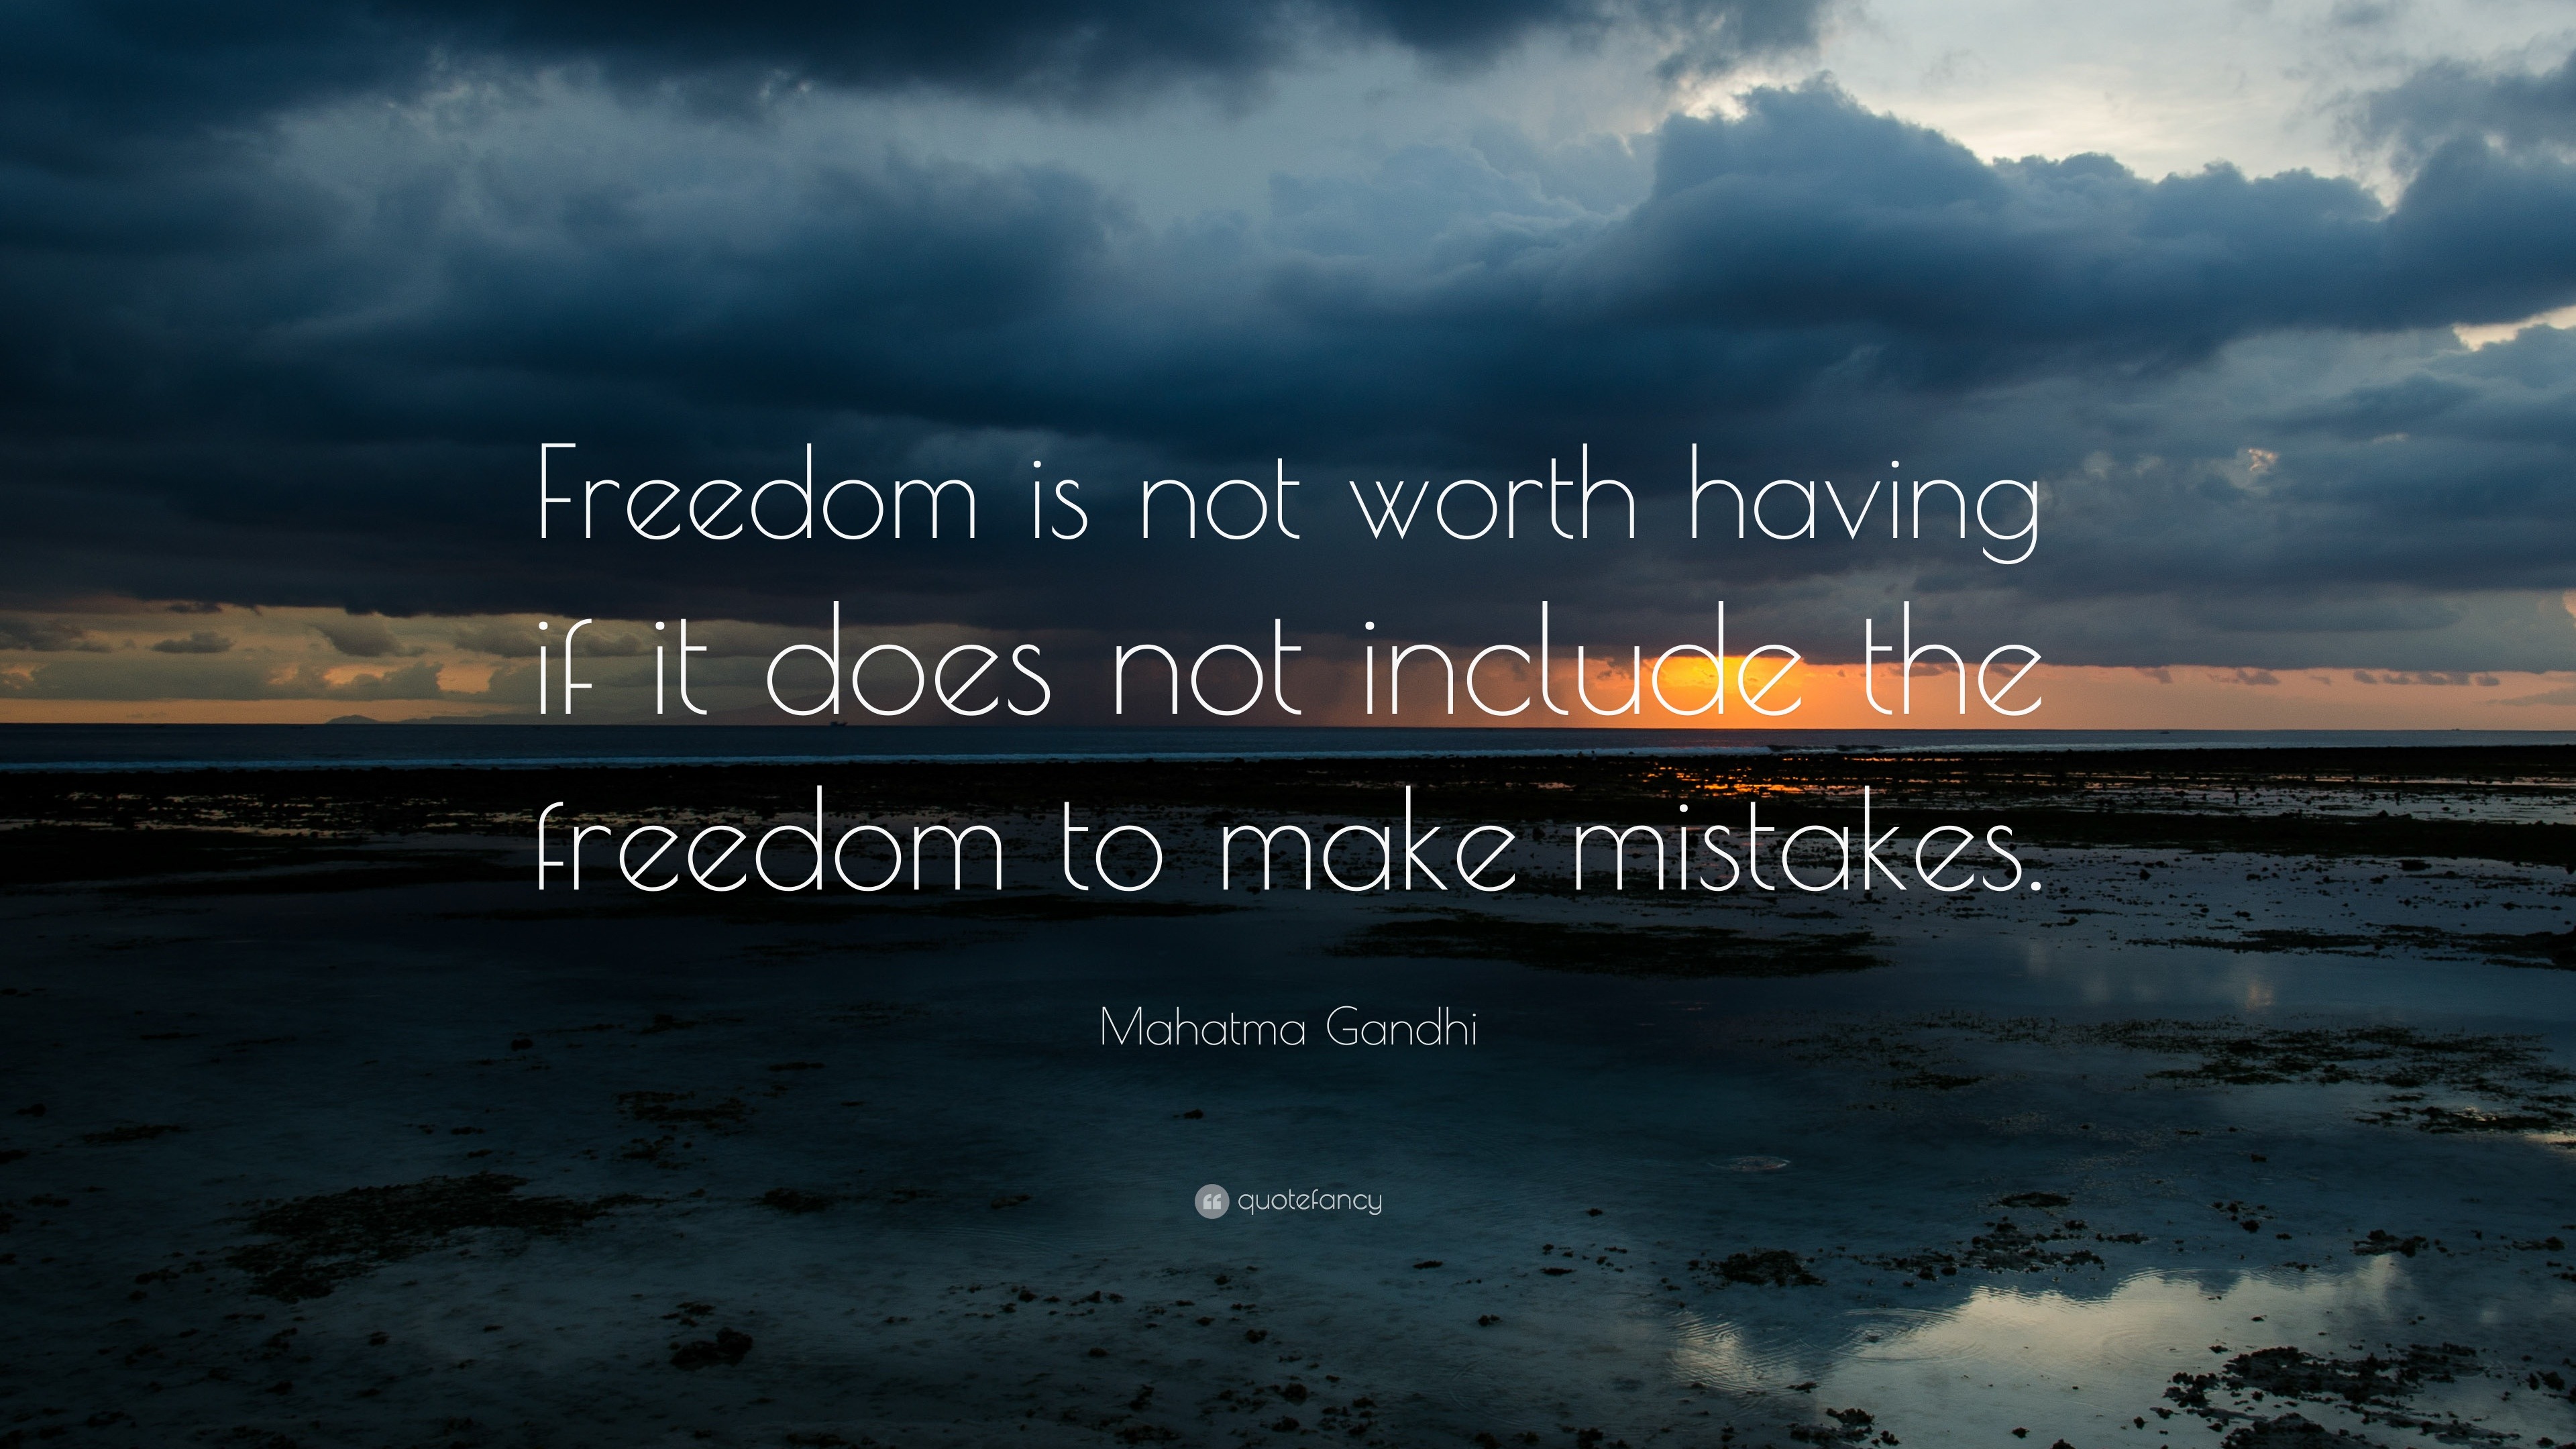 Mahatma Gandhi Quote: “Freedom is not worth having if it does not include the freedom to